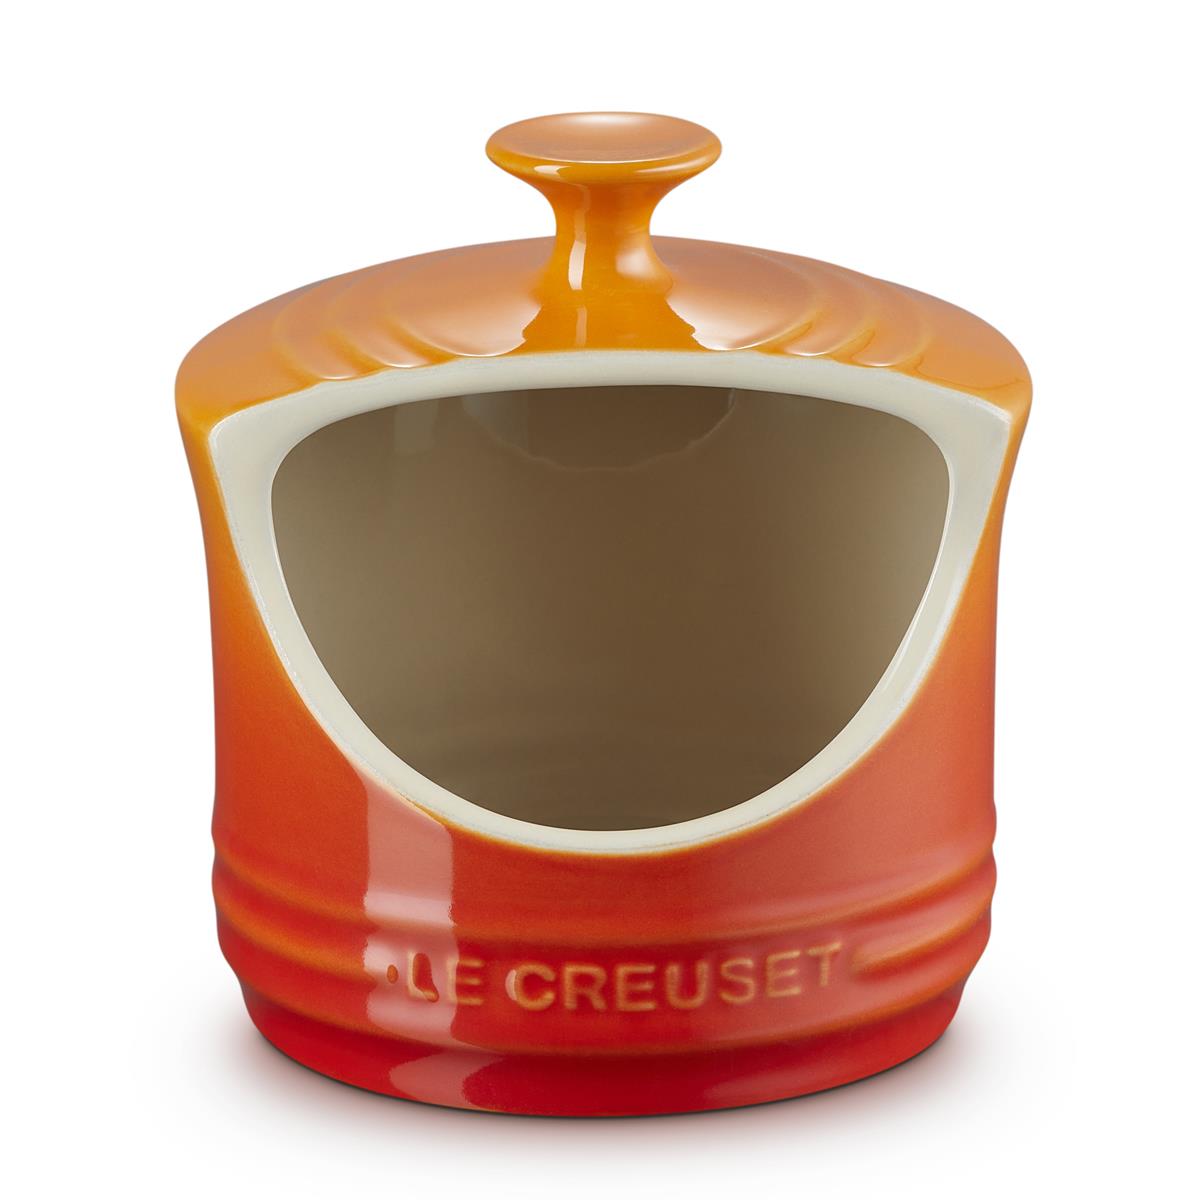 How is the le creuset salt pig crafted?